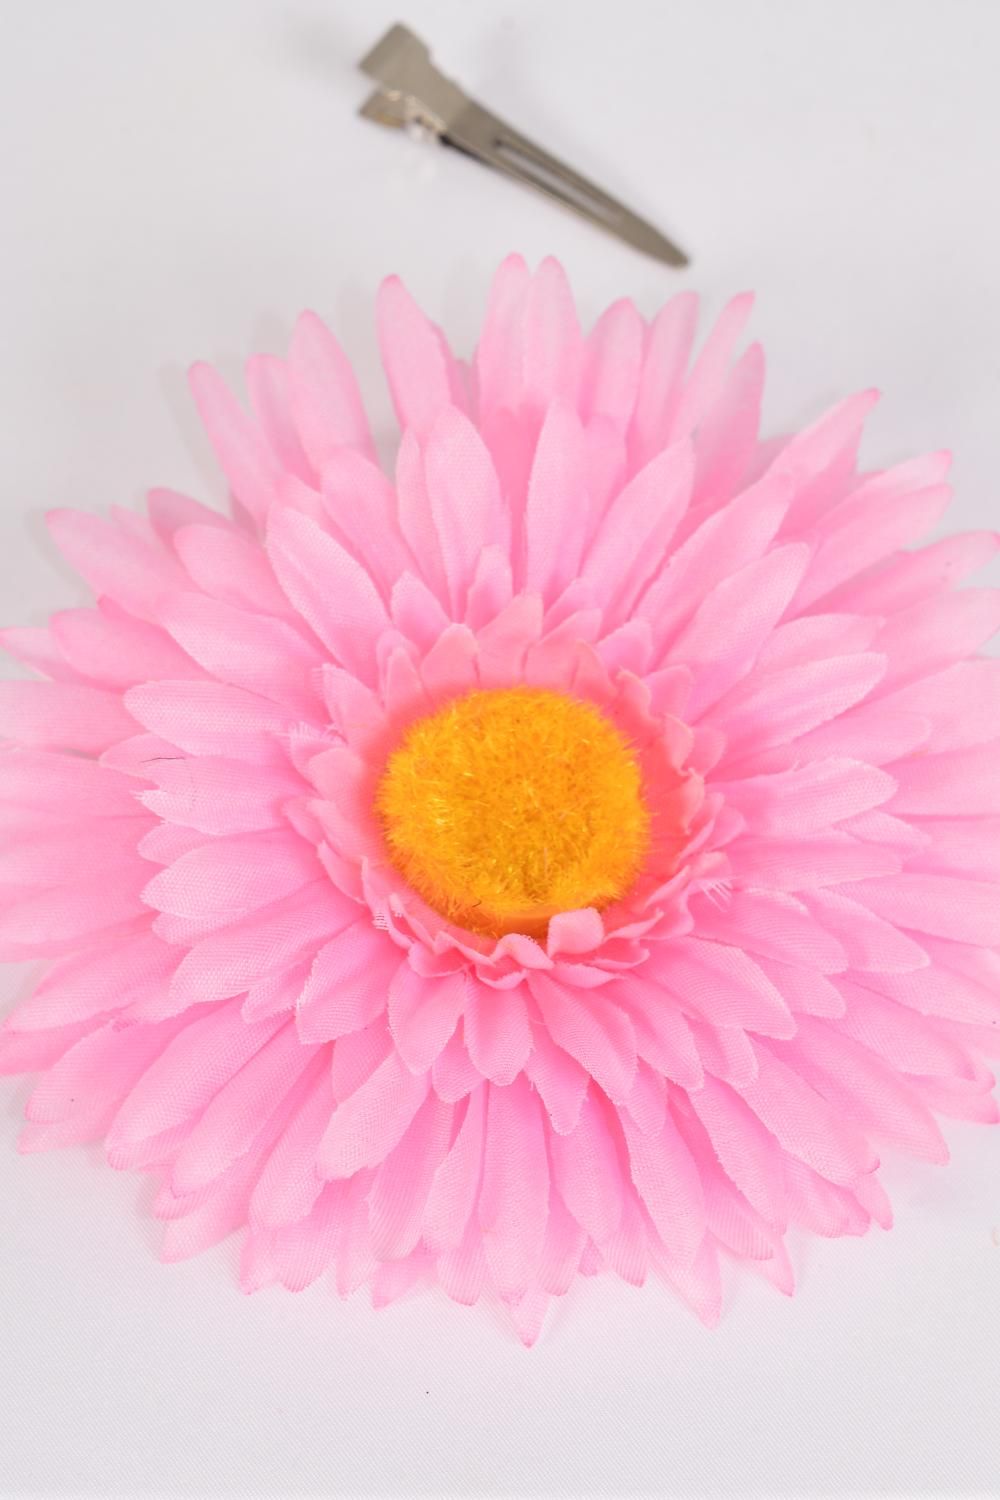 Blush Pink Faux Daisy Artificial Flowers